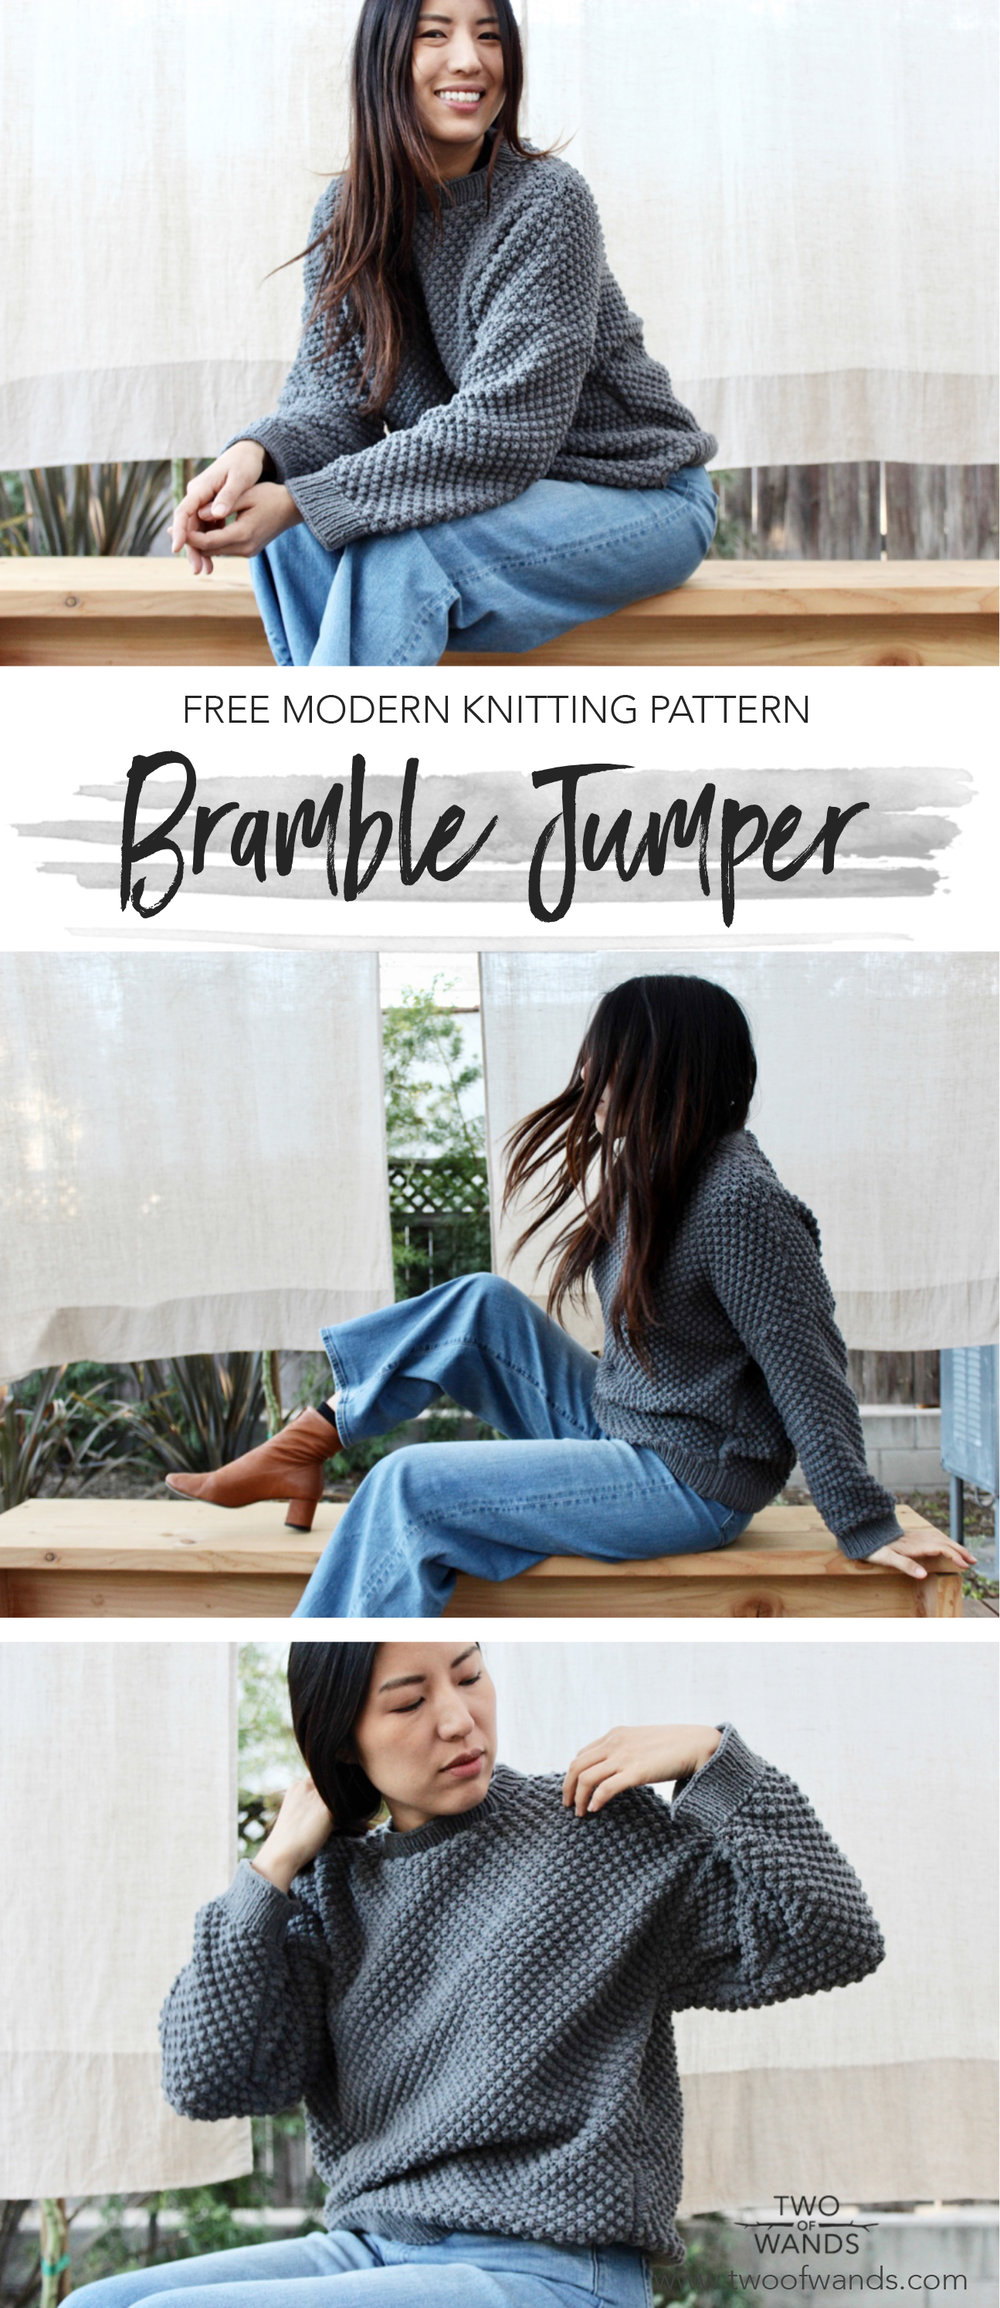 Bramble Jumper pattern by Two of Wands